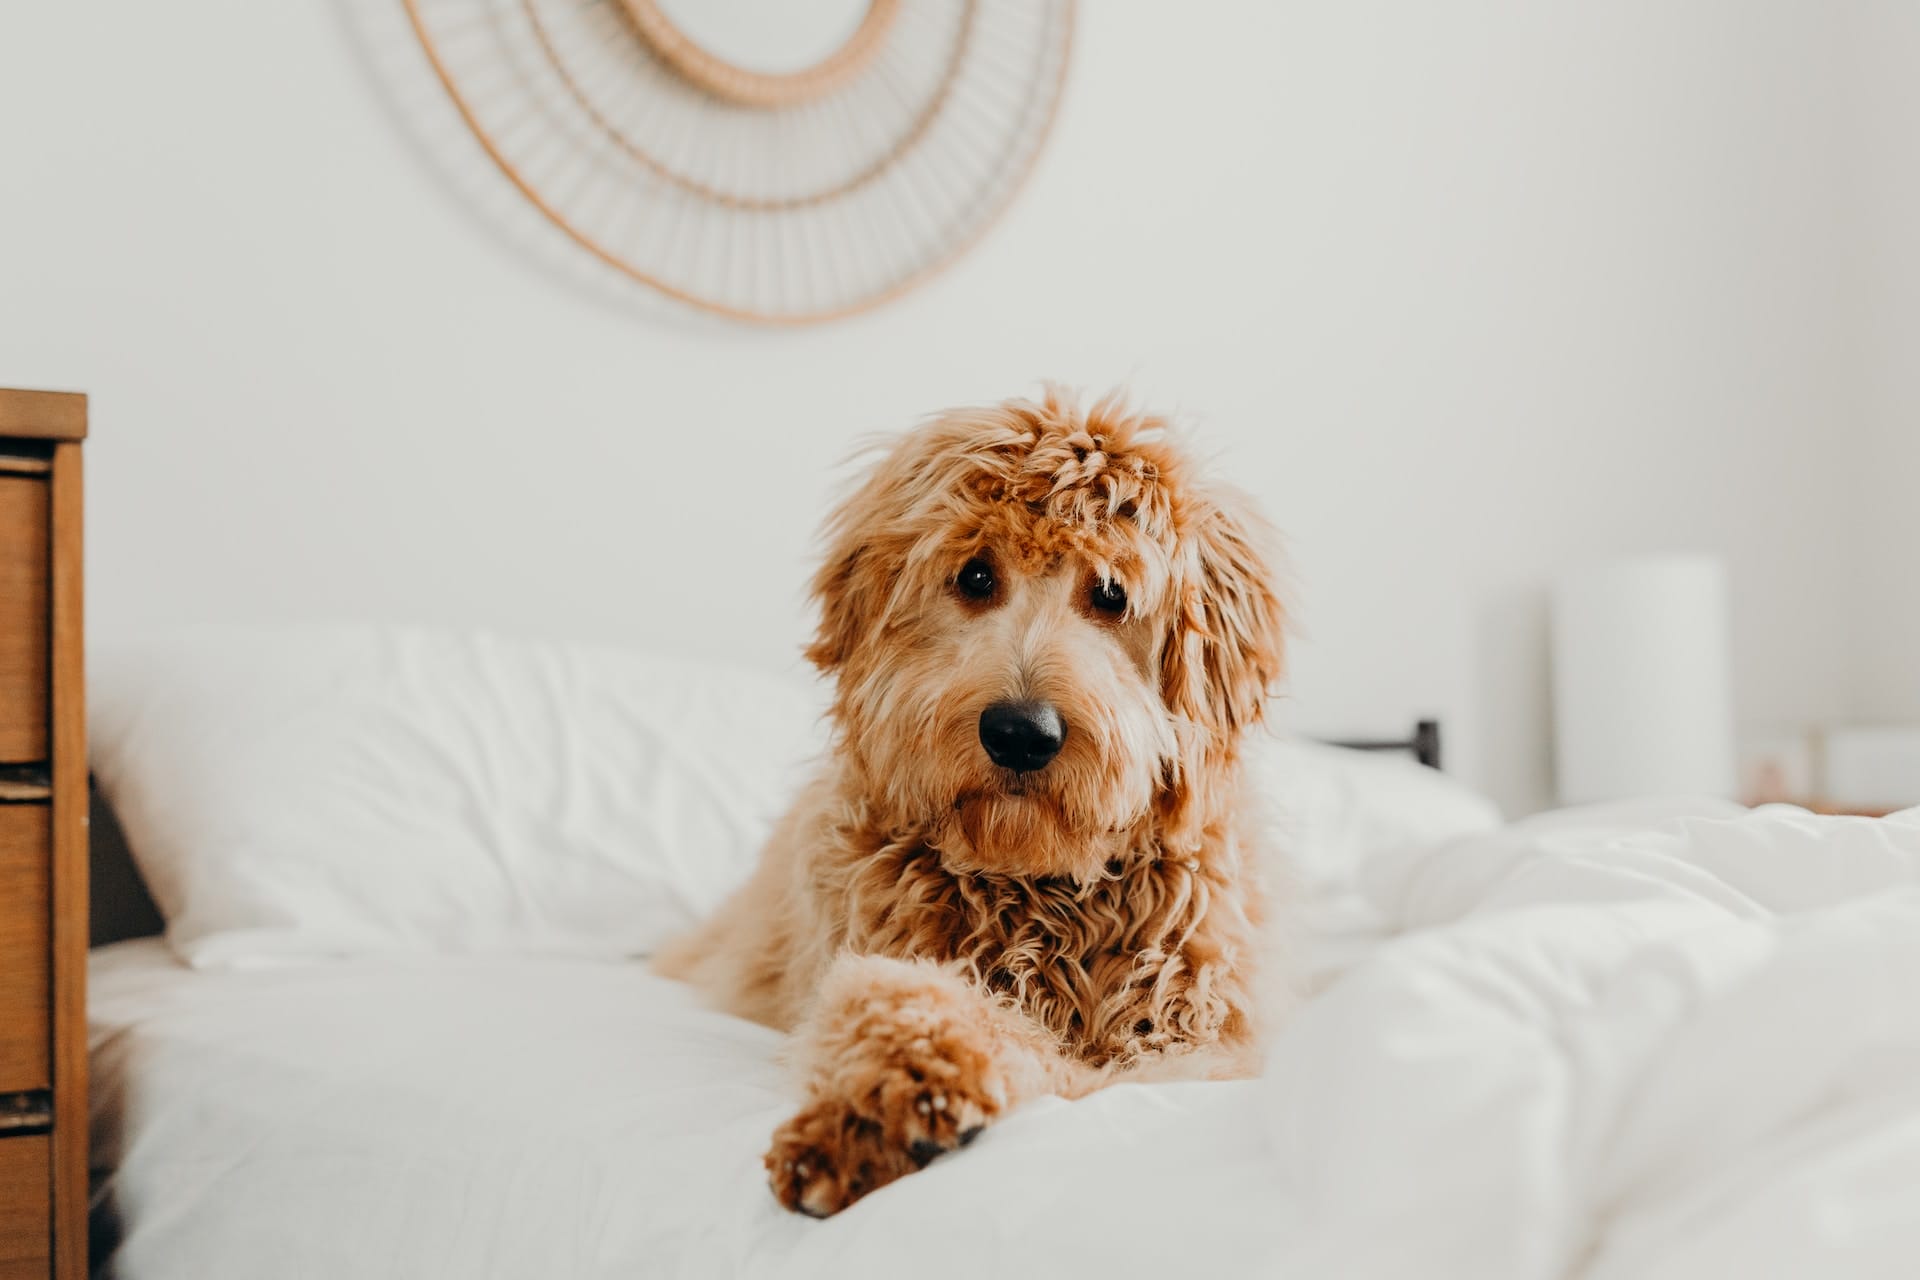 50+ Inspiring Goldendoodle Quotes for a Happy Life